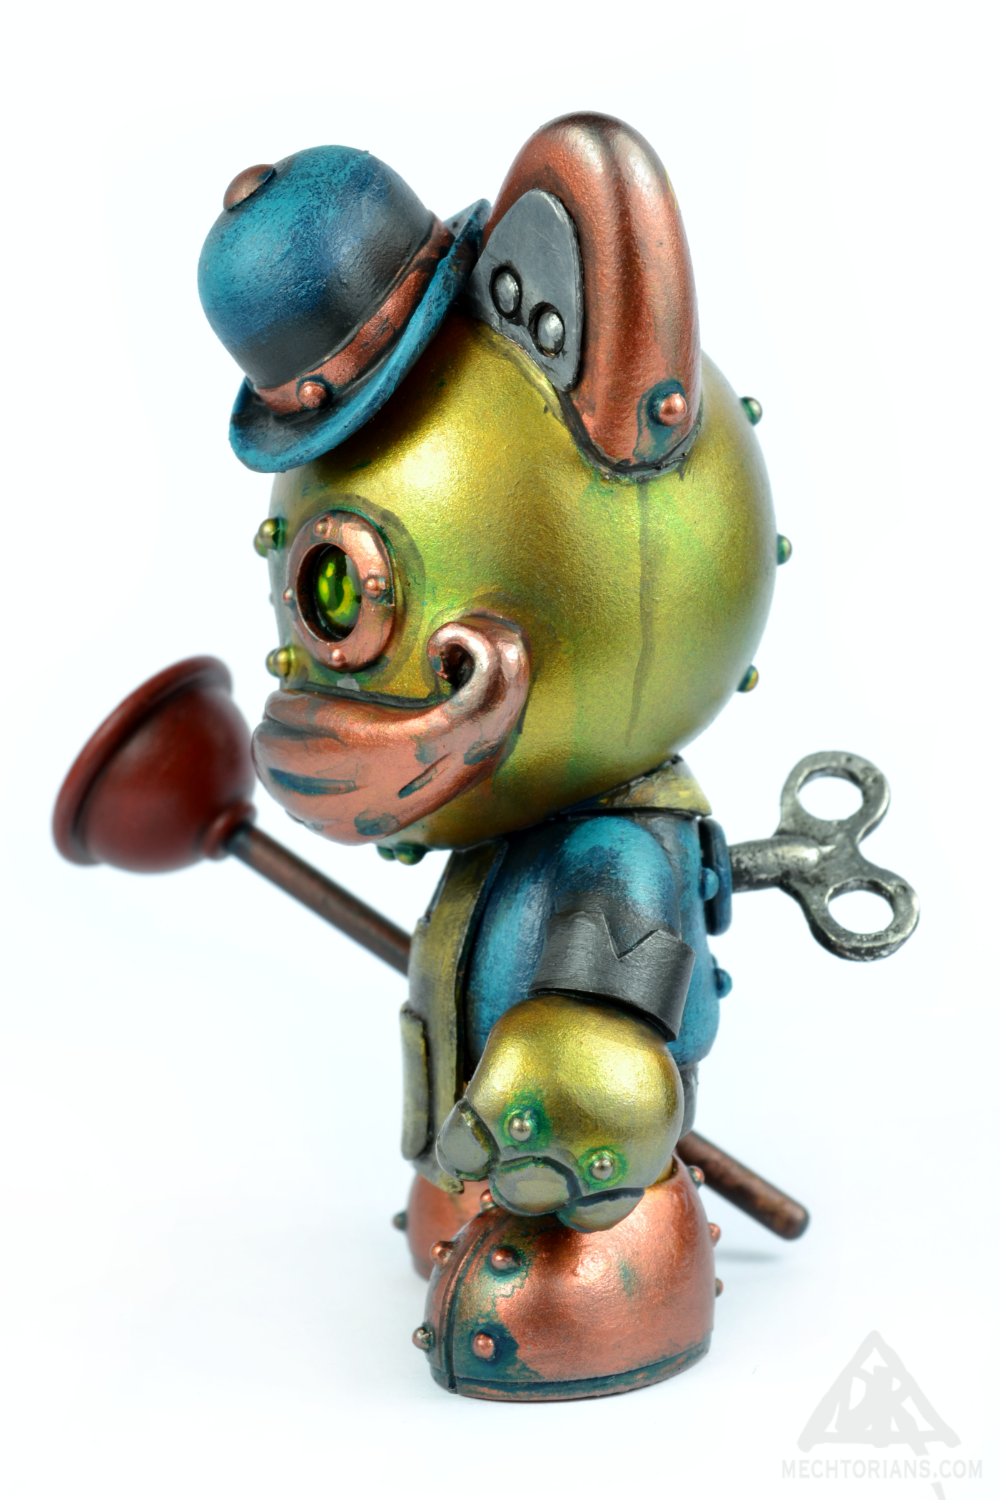 The Plumber. A Mechtorian Customised 3" Janky toy by Doktor A. Bruce Whistlecraft.